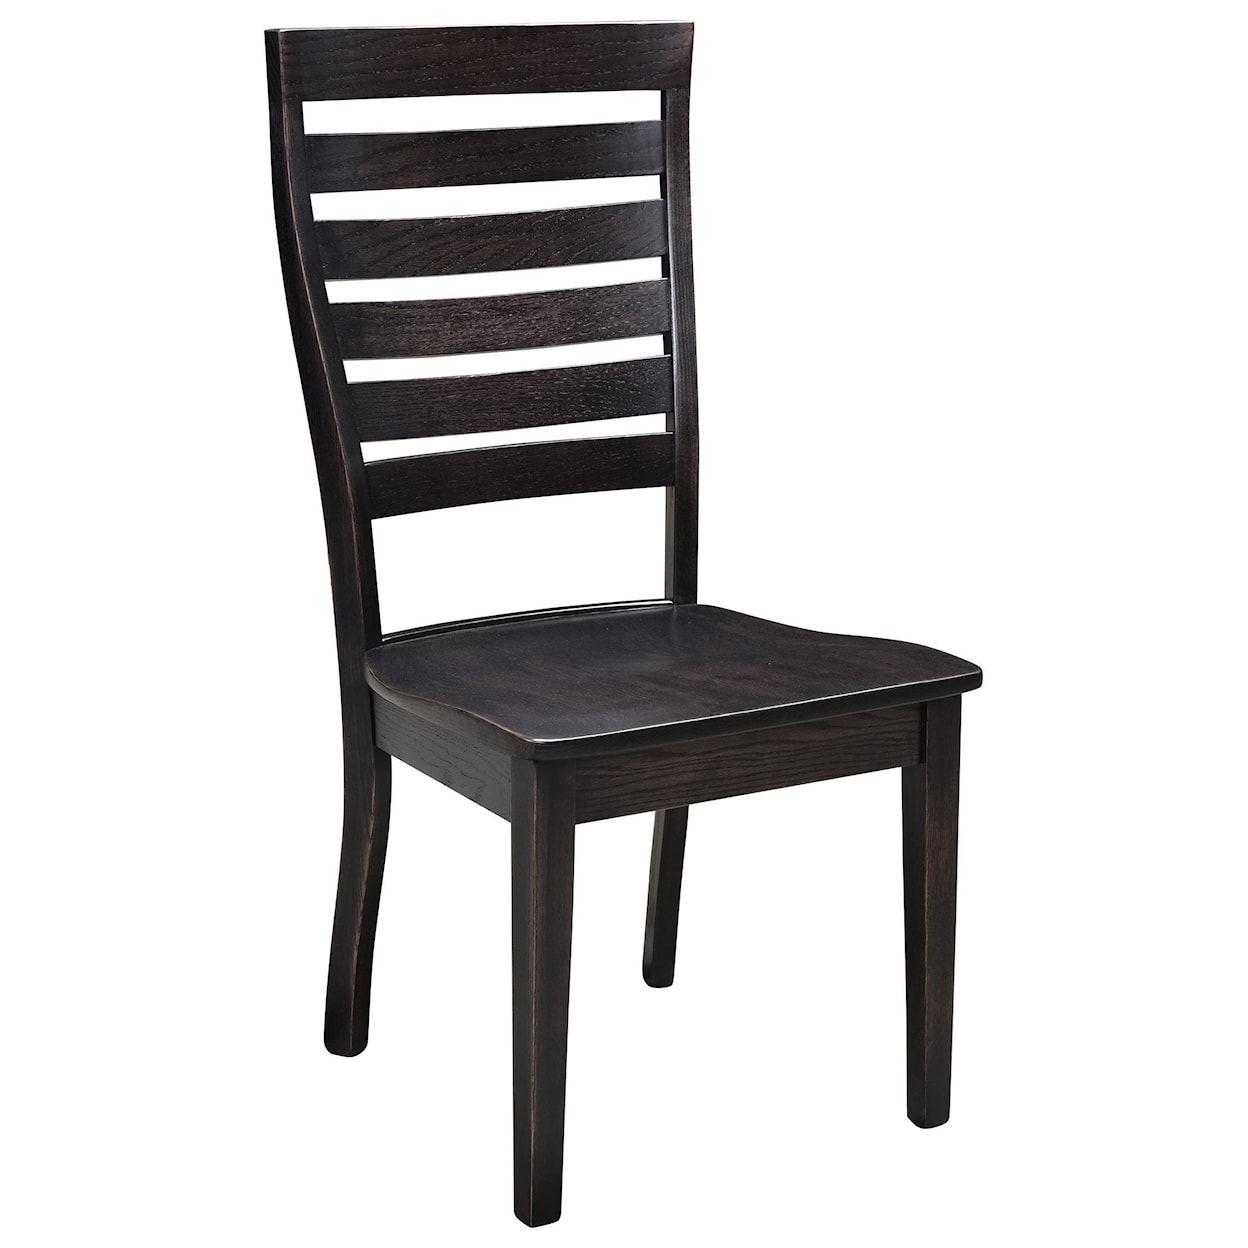 Wengerd Wood Products Wakefield Side Chair